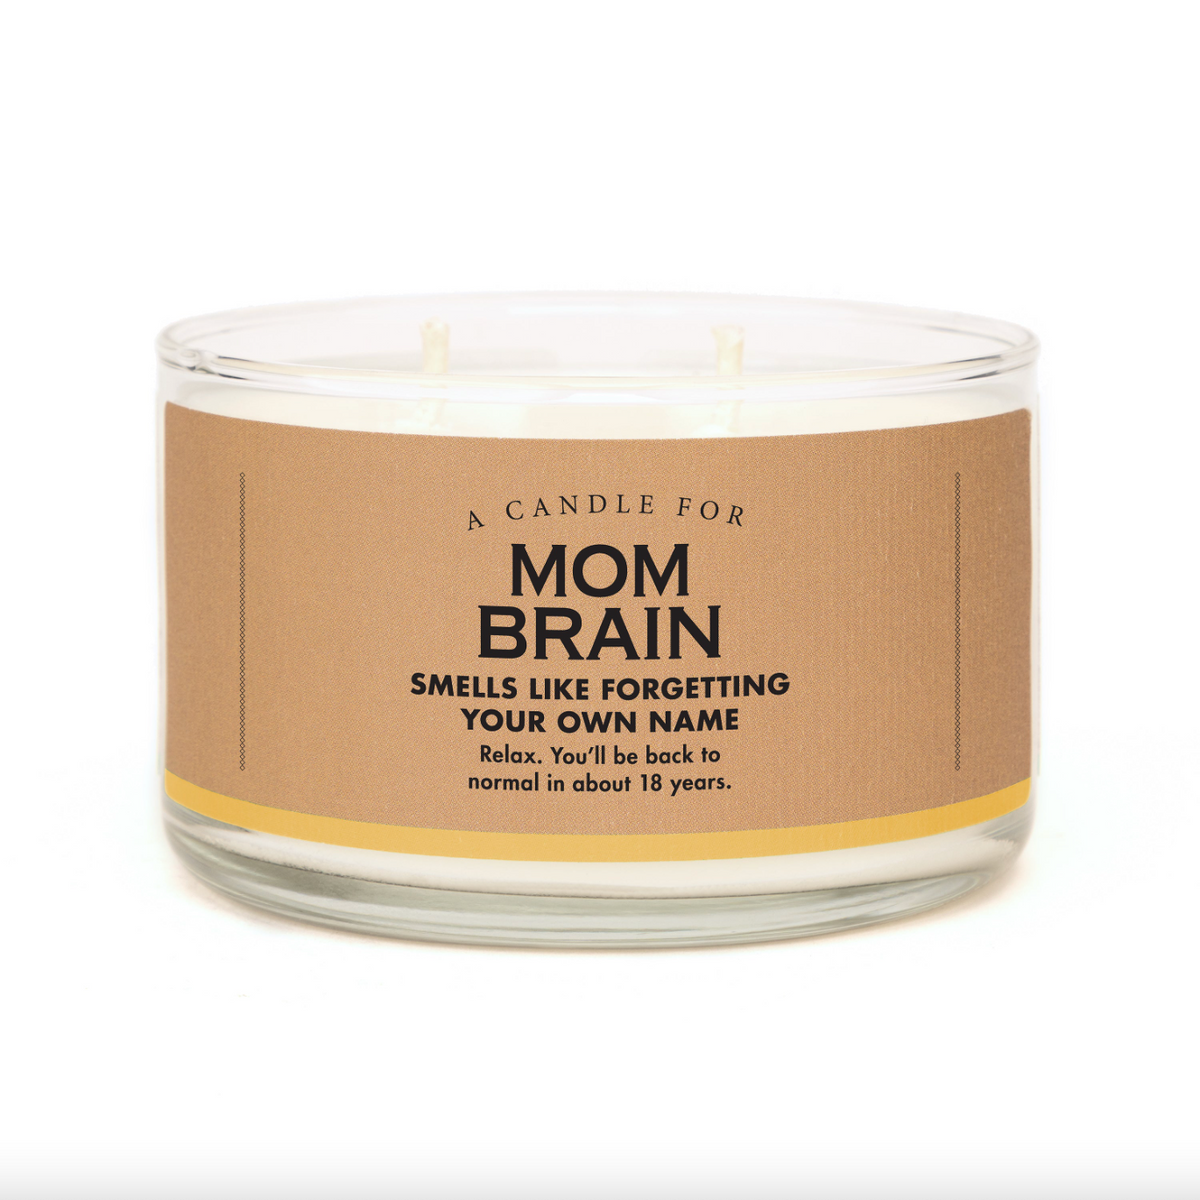 A Candle for Mom Brain - Heart of the Home LV